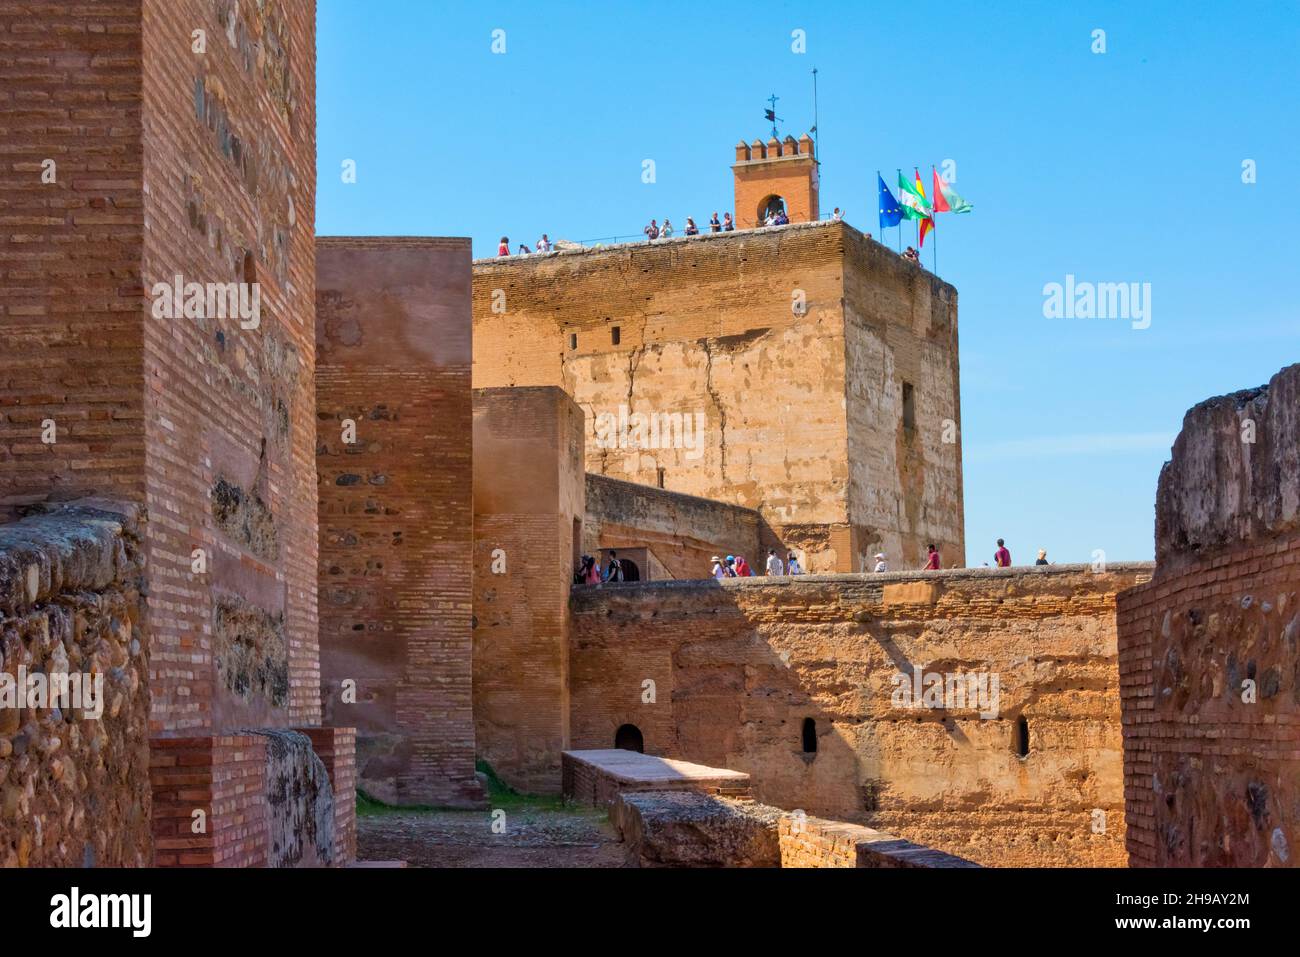 The Alcazaba, fortress towers and outer walls of Alhambra, Granada, Granada Province, Andalusia Autonomous Community, Spain Stock Photo